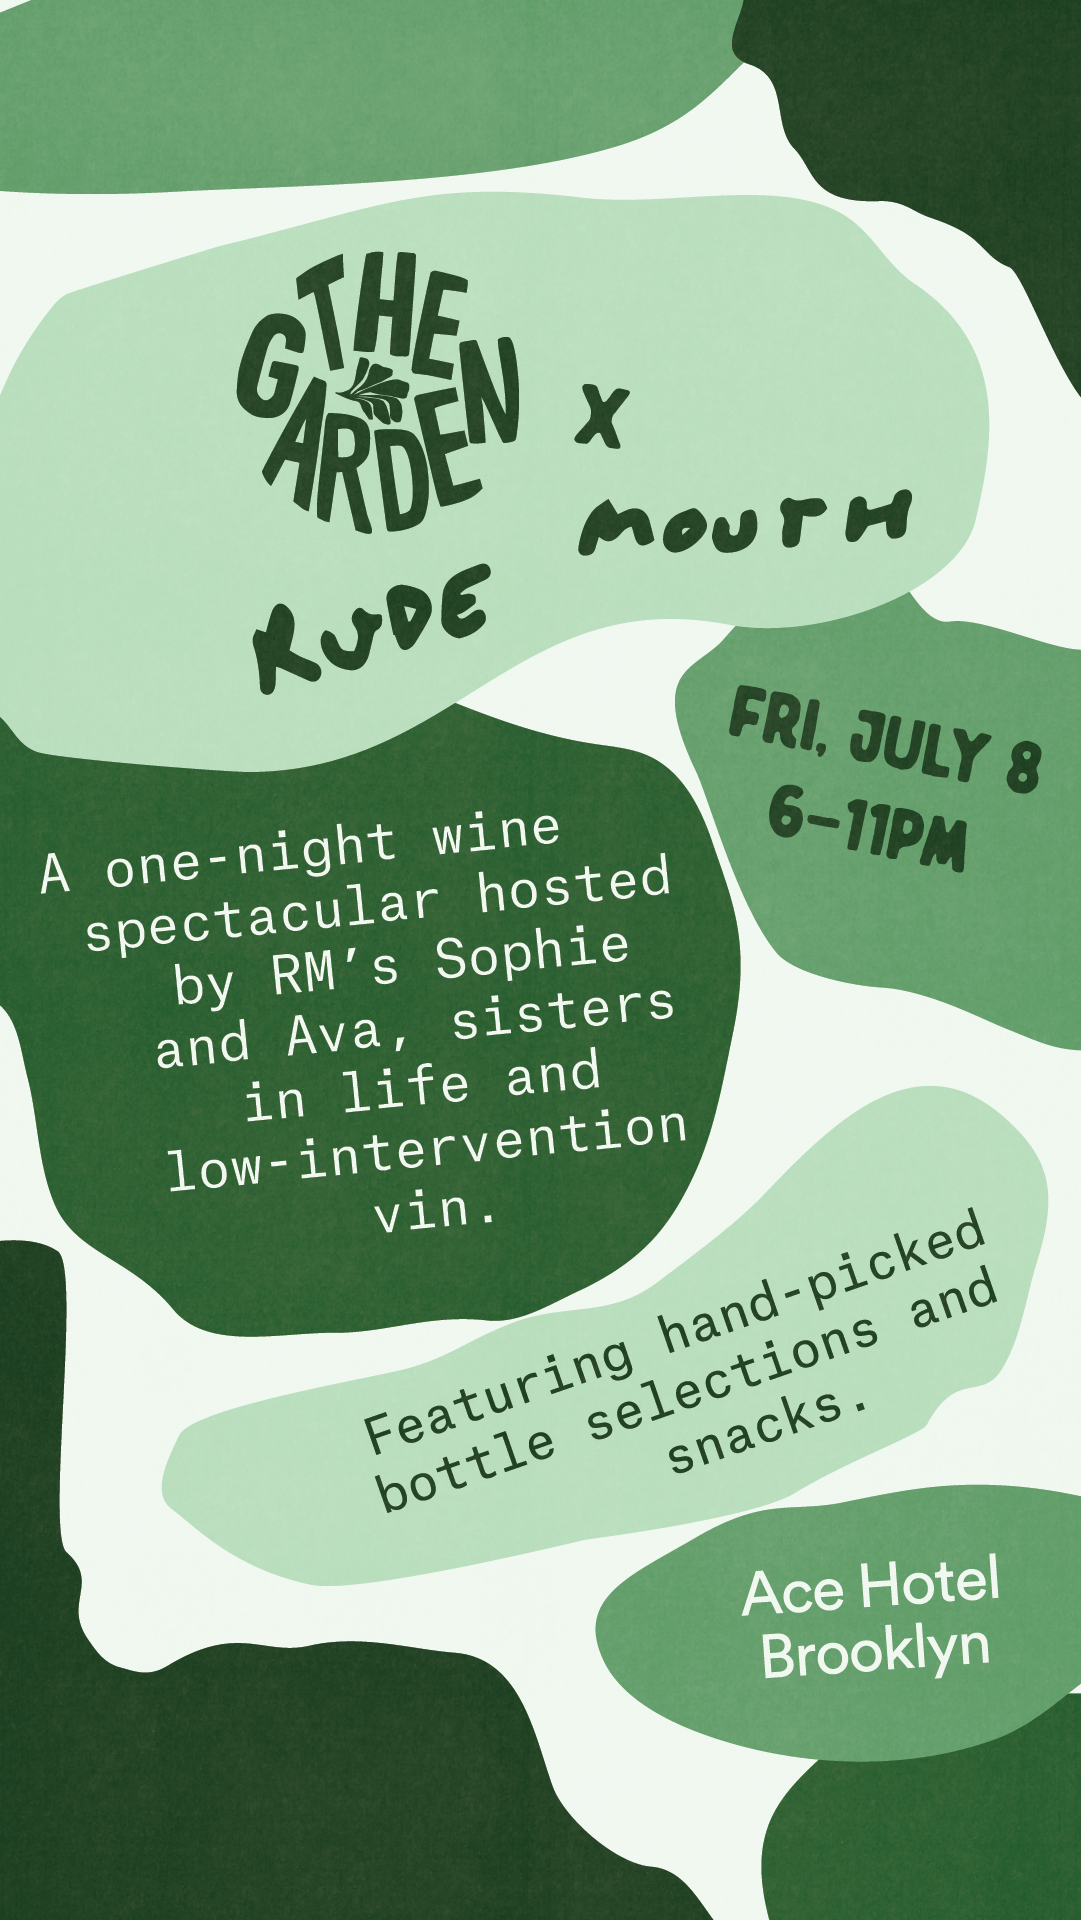 Rude Mouth promo flyer